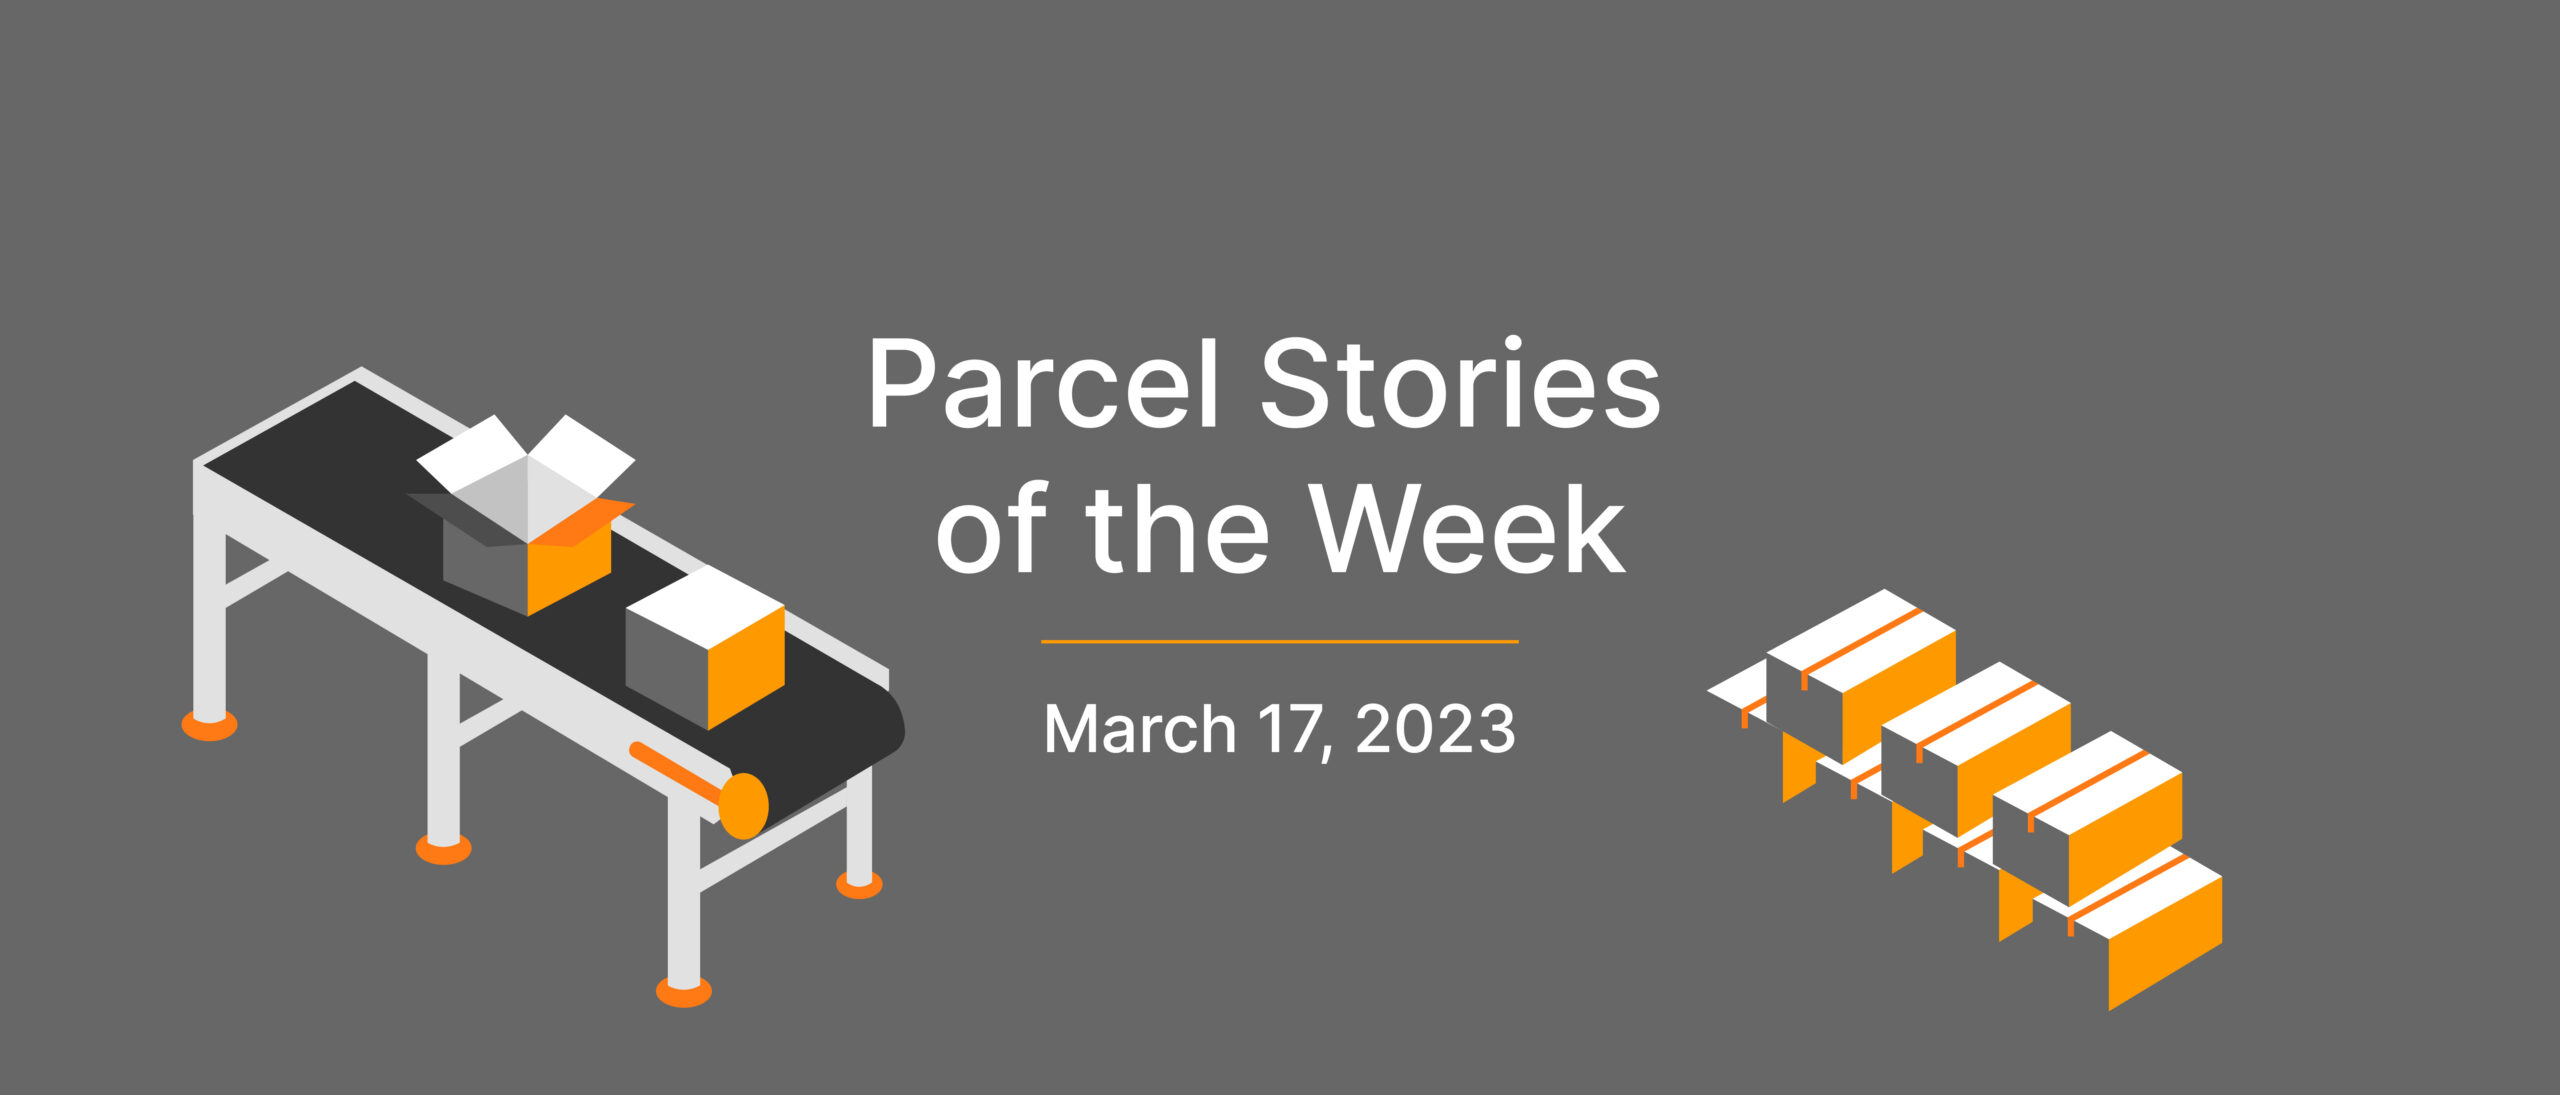 This Week In Parcel: March 17, 2023